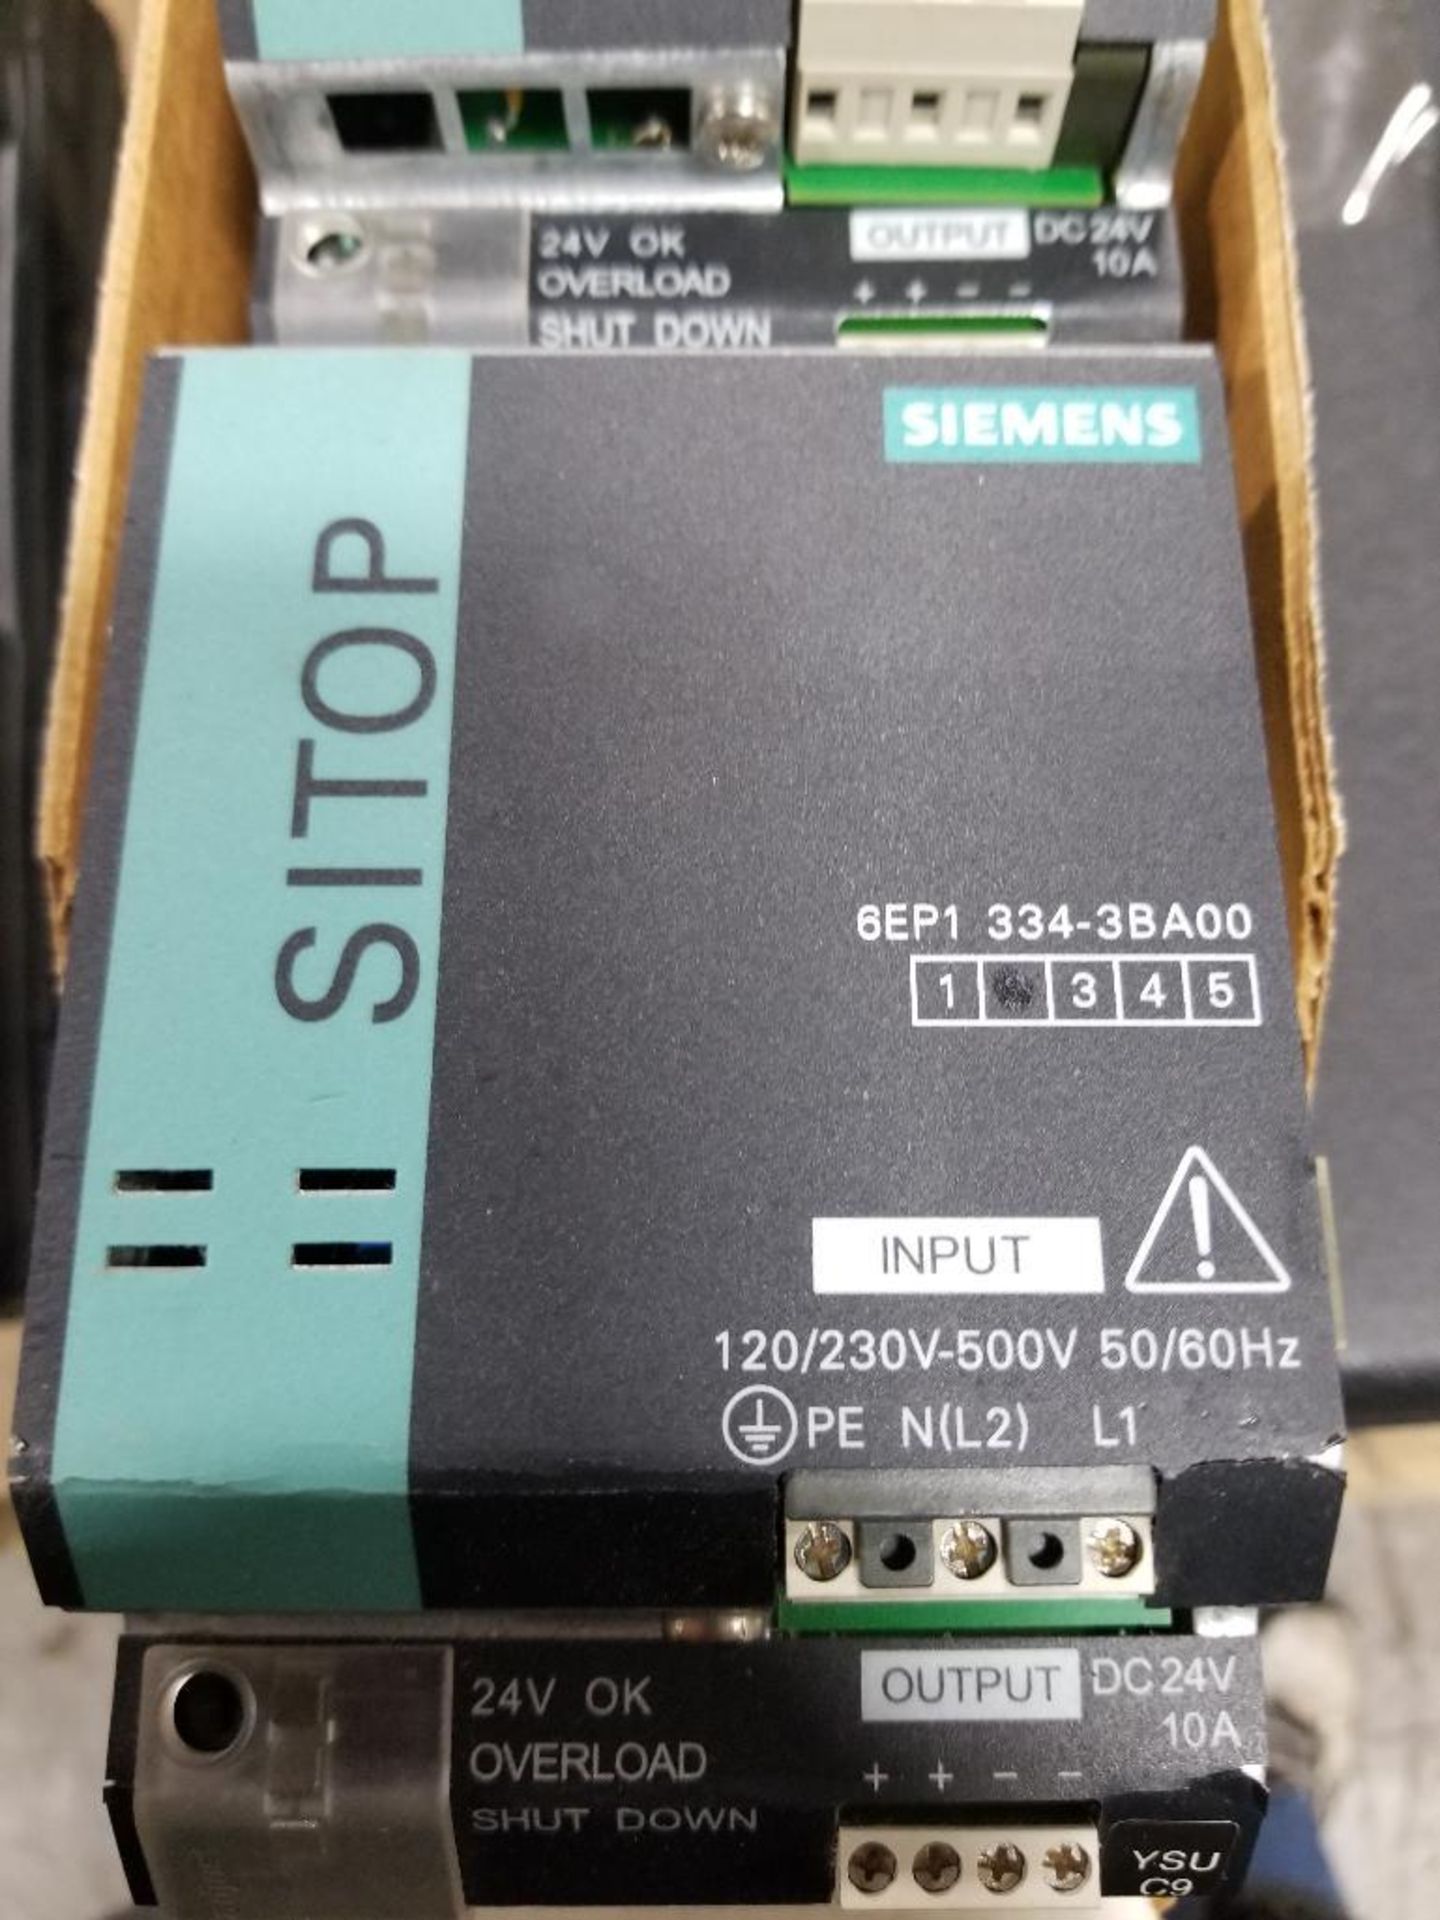 Qty 3 - Siemens Sitop power supply. Part number 6EP1334-3BA00. - Image 4 of 4